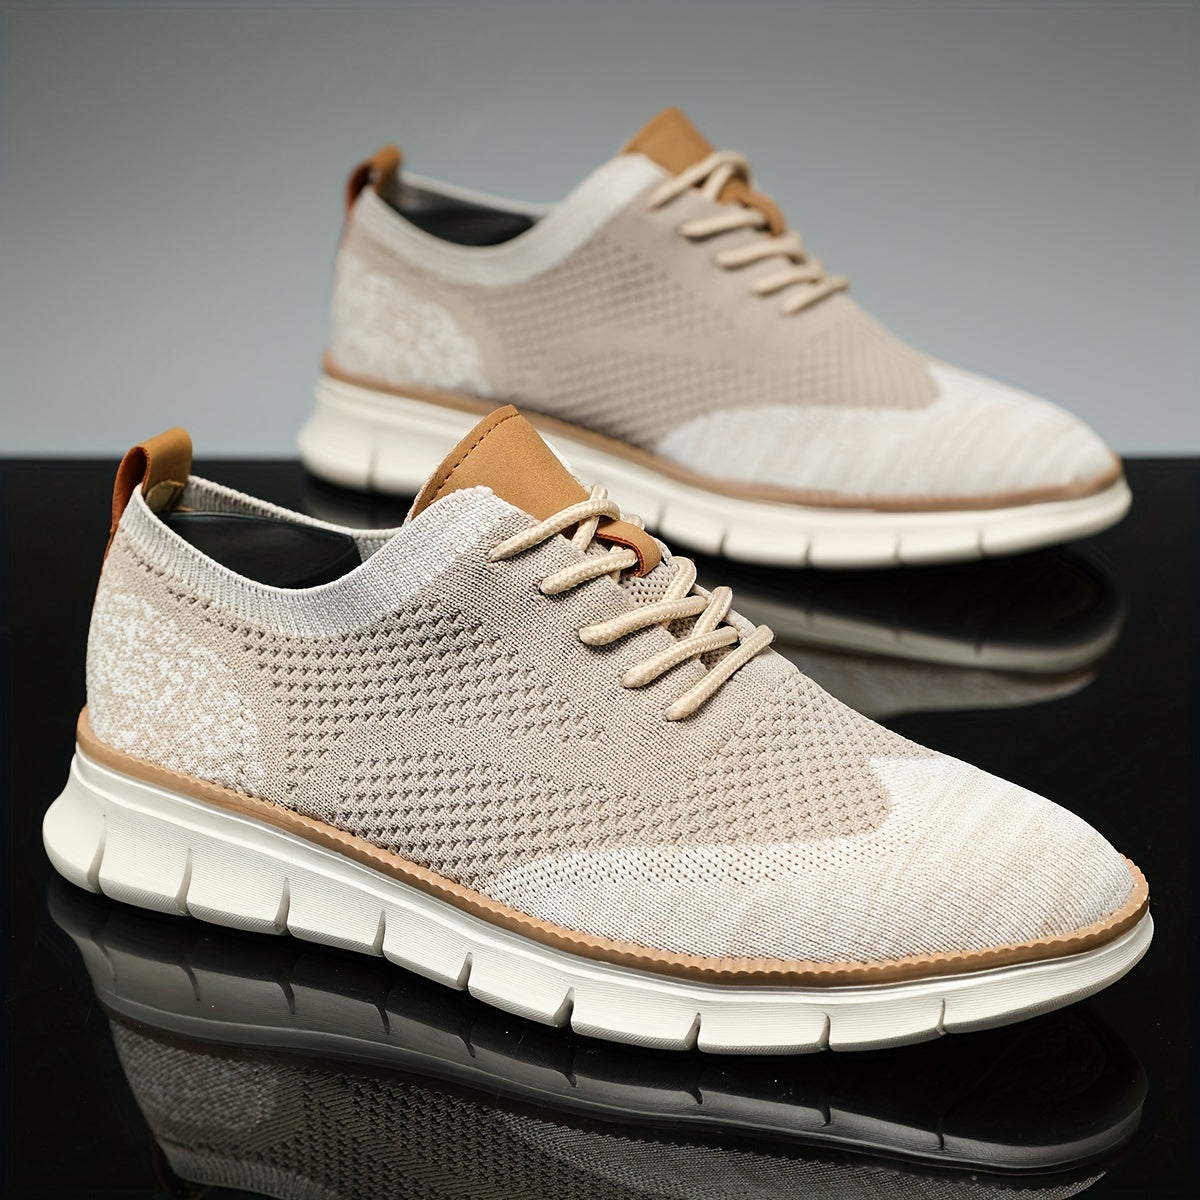 Trendy Woven Knit Breathable Sneakers - Comfy Non-Slip Lace-Up Shoes for Outdoor Activities